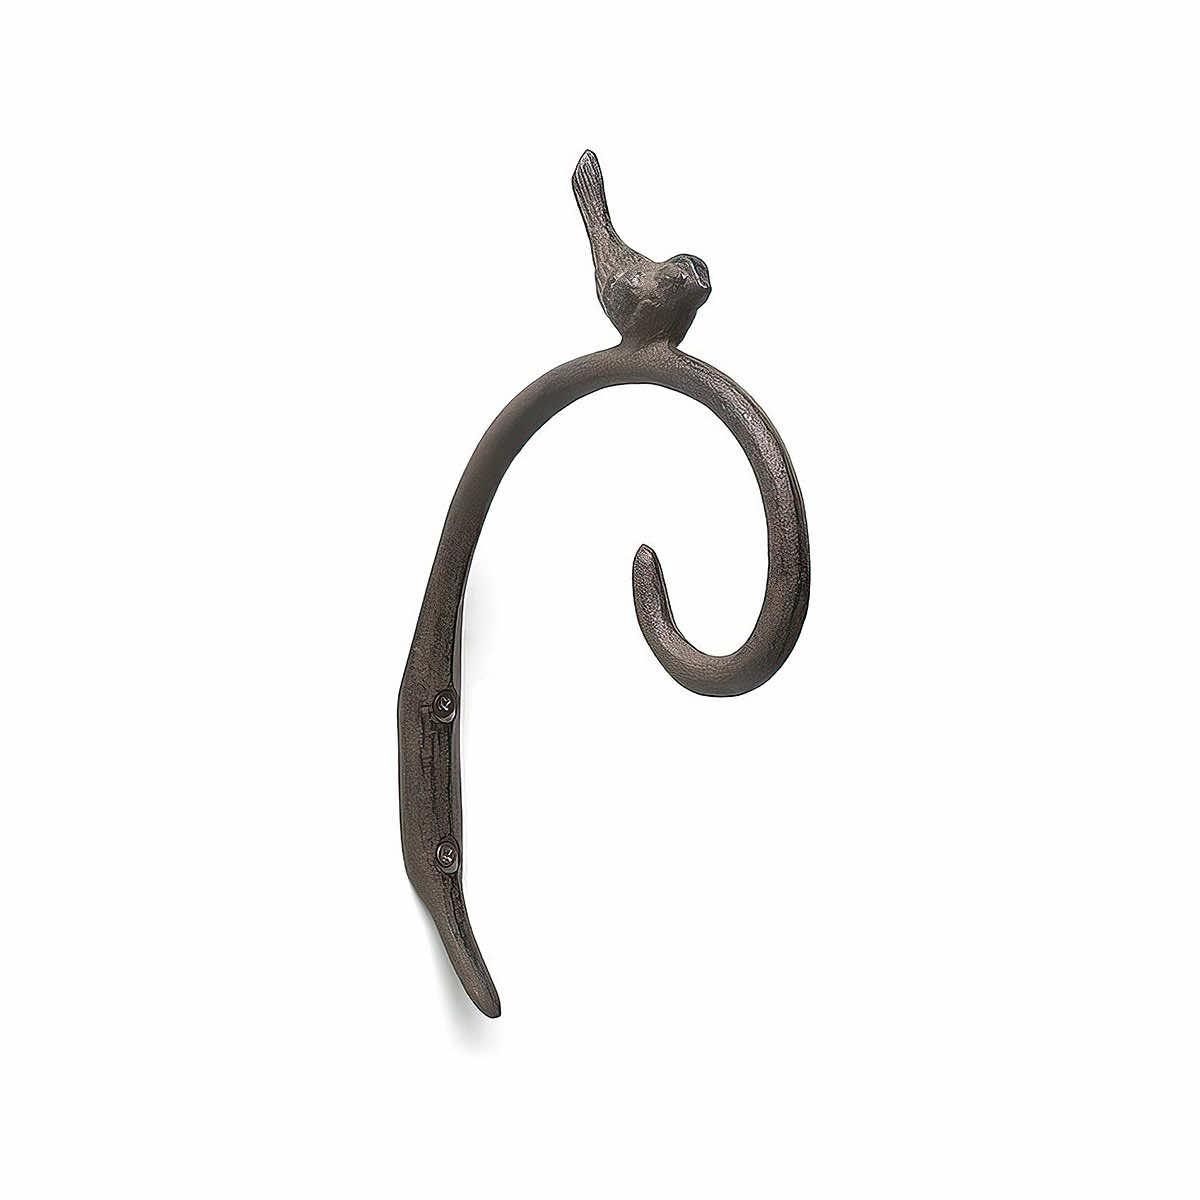  Curl Hook With Bird